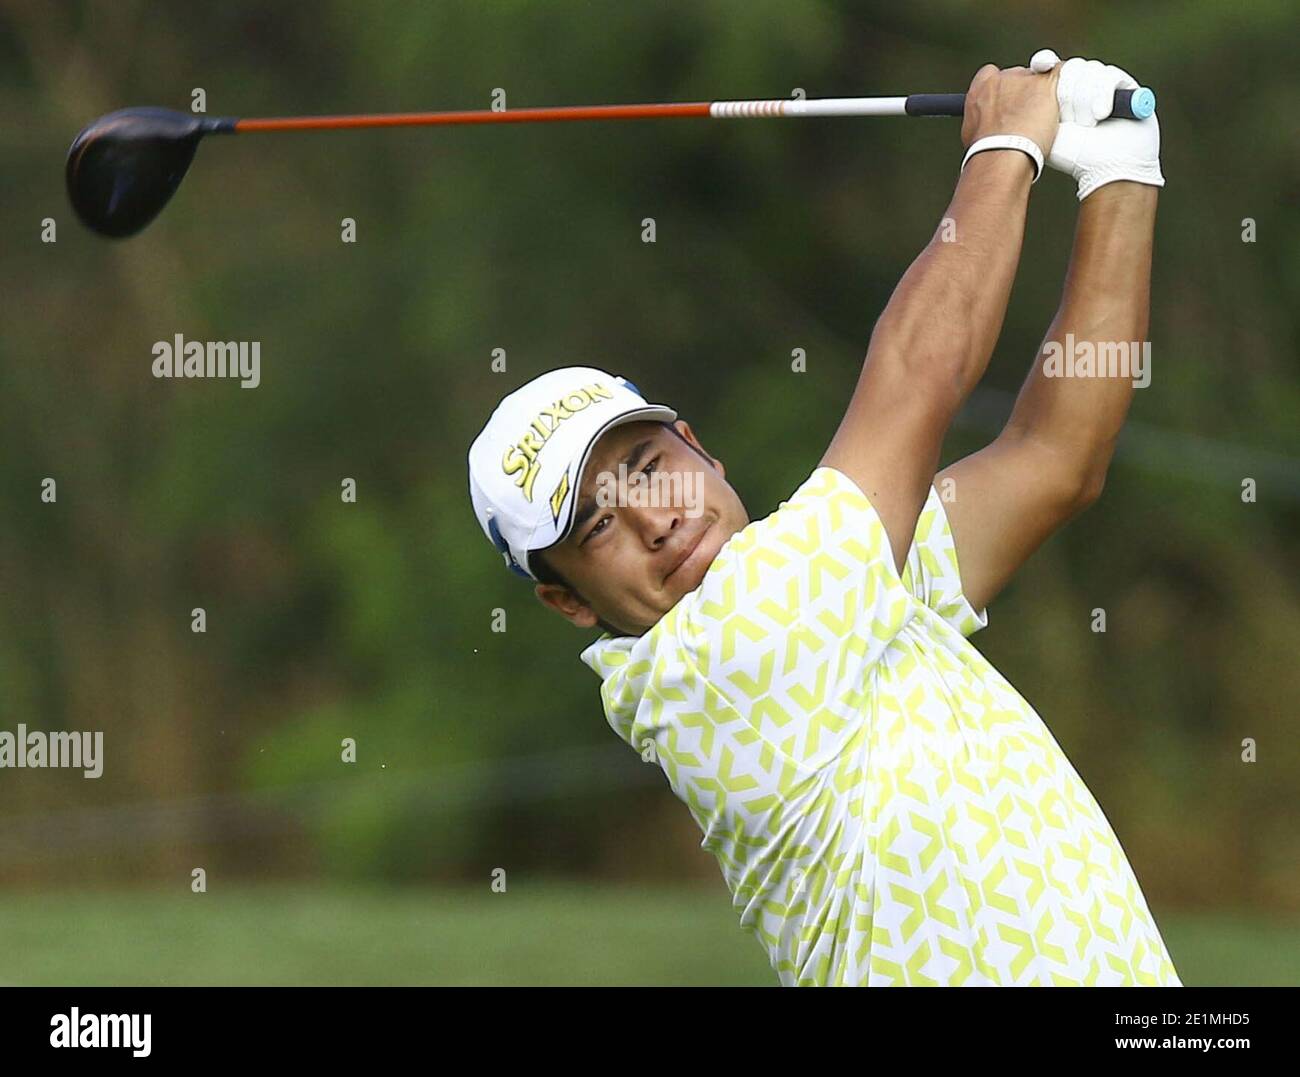 Hideki Matsuyama of Japan hits off the fourth tee during the first round of the Sentry Tournament of Champions at the Plantation Course in Kapalua, Hawaii, on Jan. 7, 2021. (Kyodo)==Kyodo Photo via Credit: Newscom/Alamy Live News Stock Photo